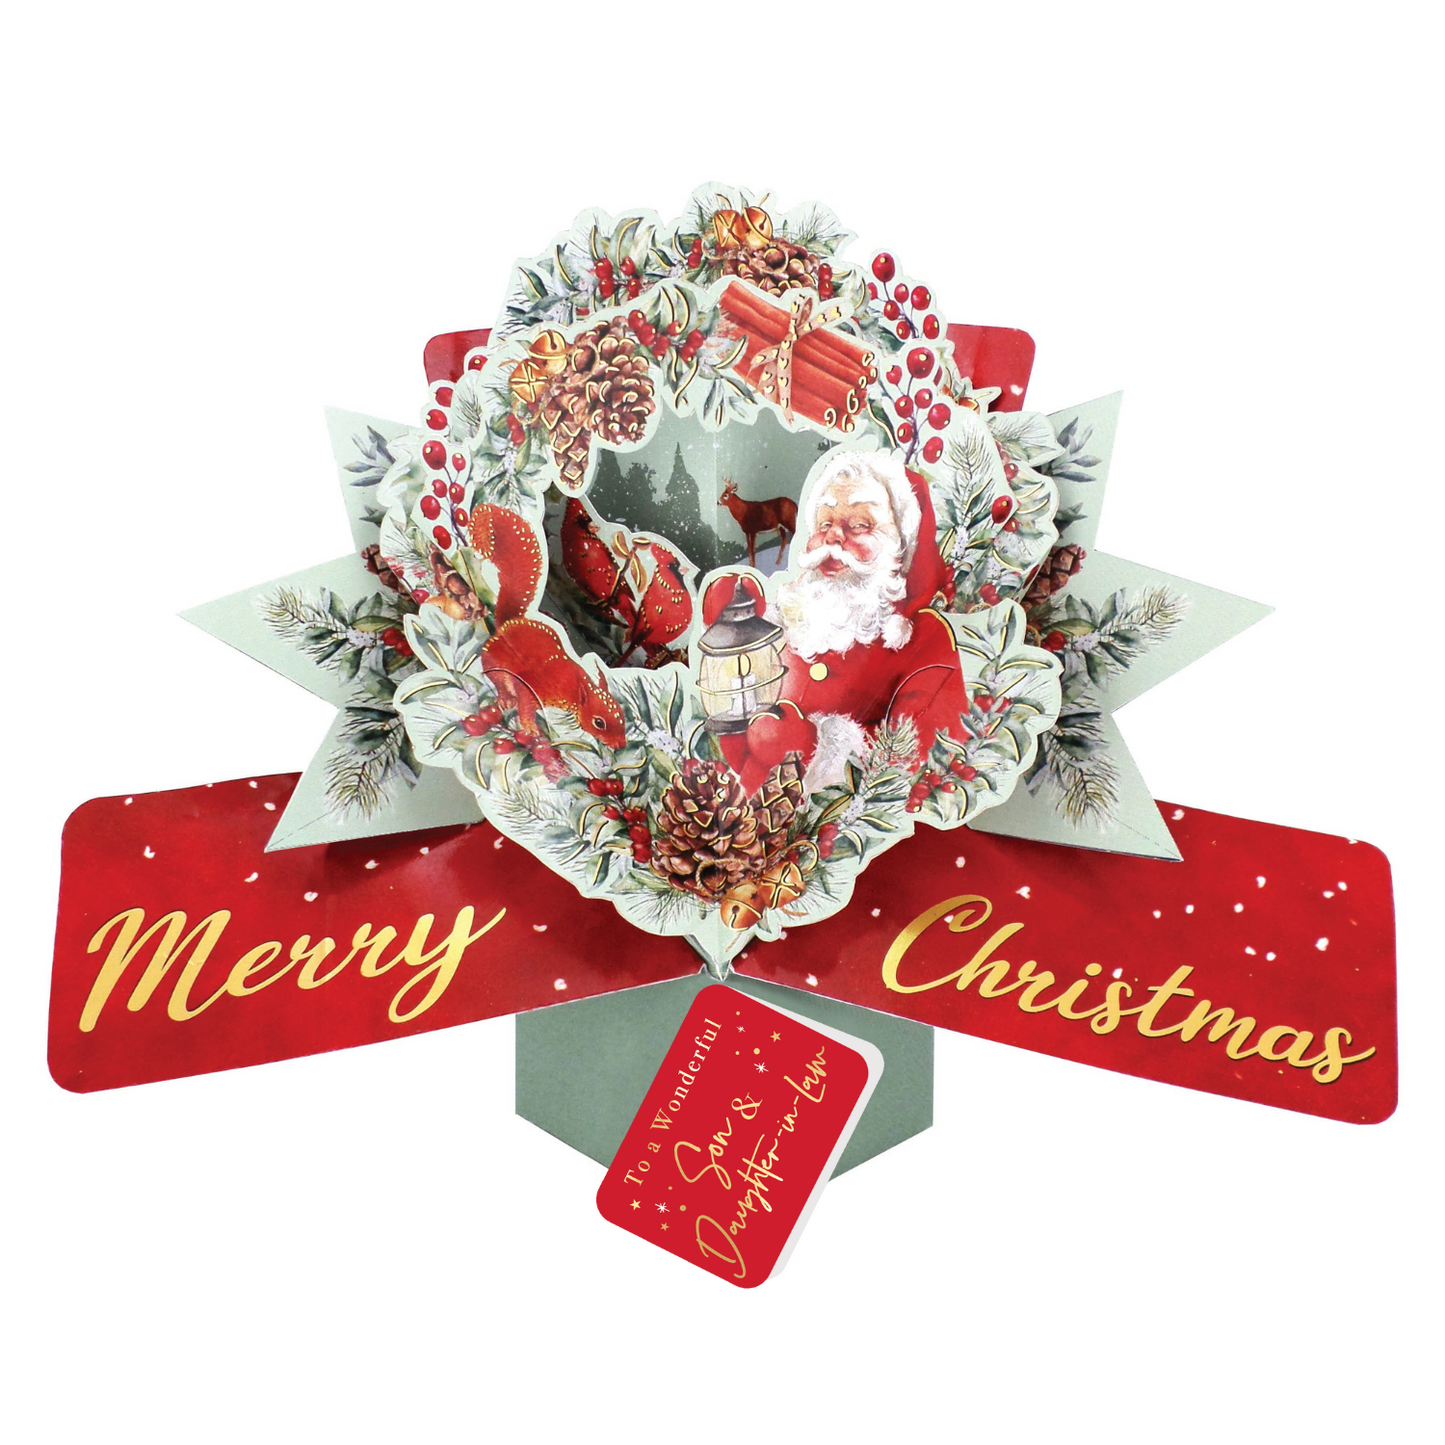 Son & Daughter-In-Law Christmas Card 3D Santa Claus Pop Up Christmas Card